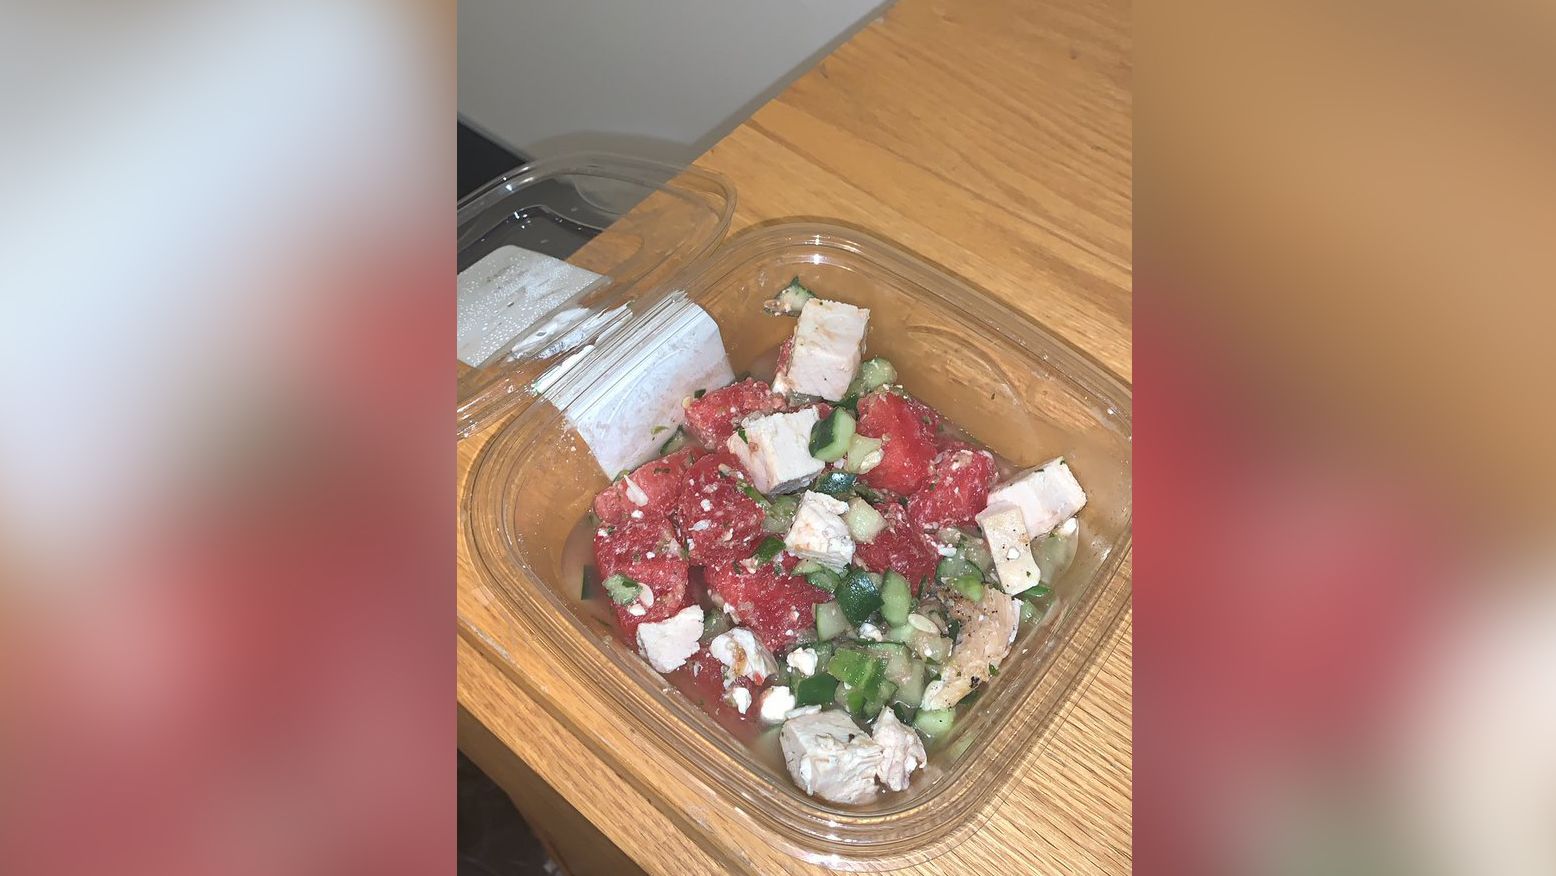 NYU student Dorothy Akpovwa wasn't aware you could combine chicken, cucumber and watermelon into a salad. But that's dorm quarantine cuisine.